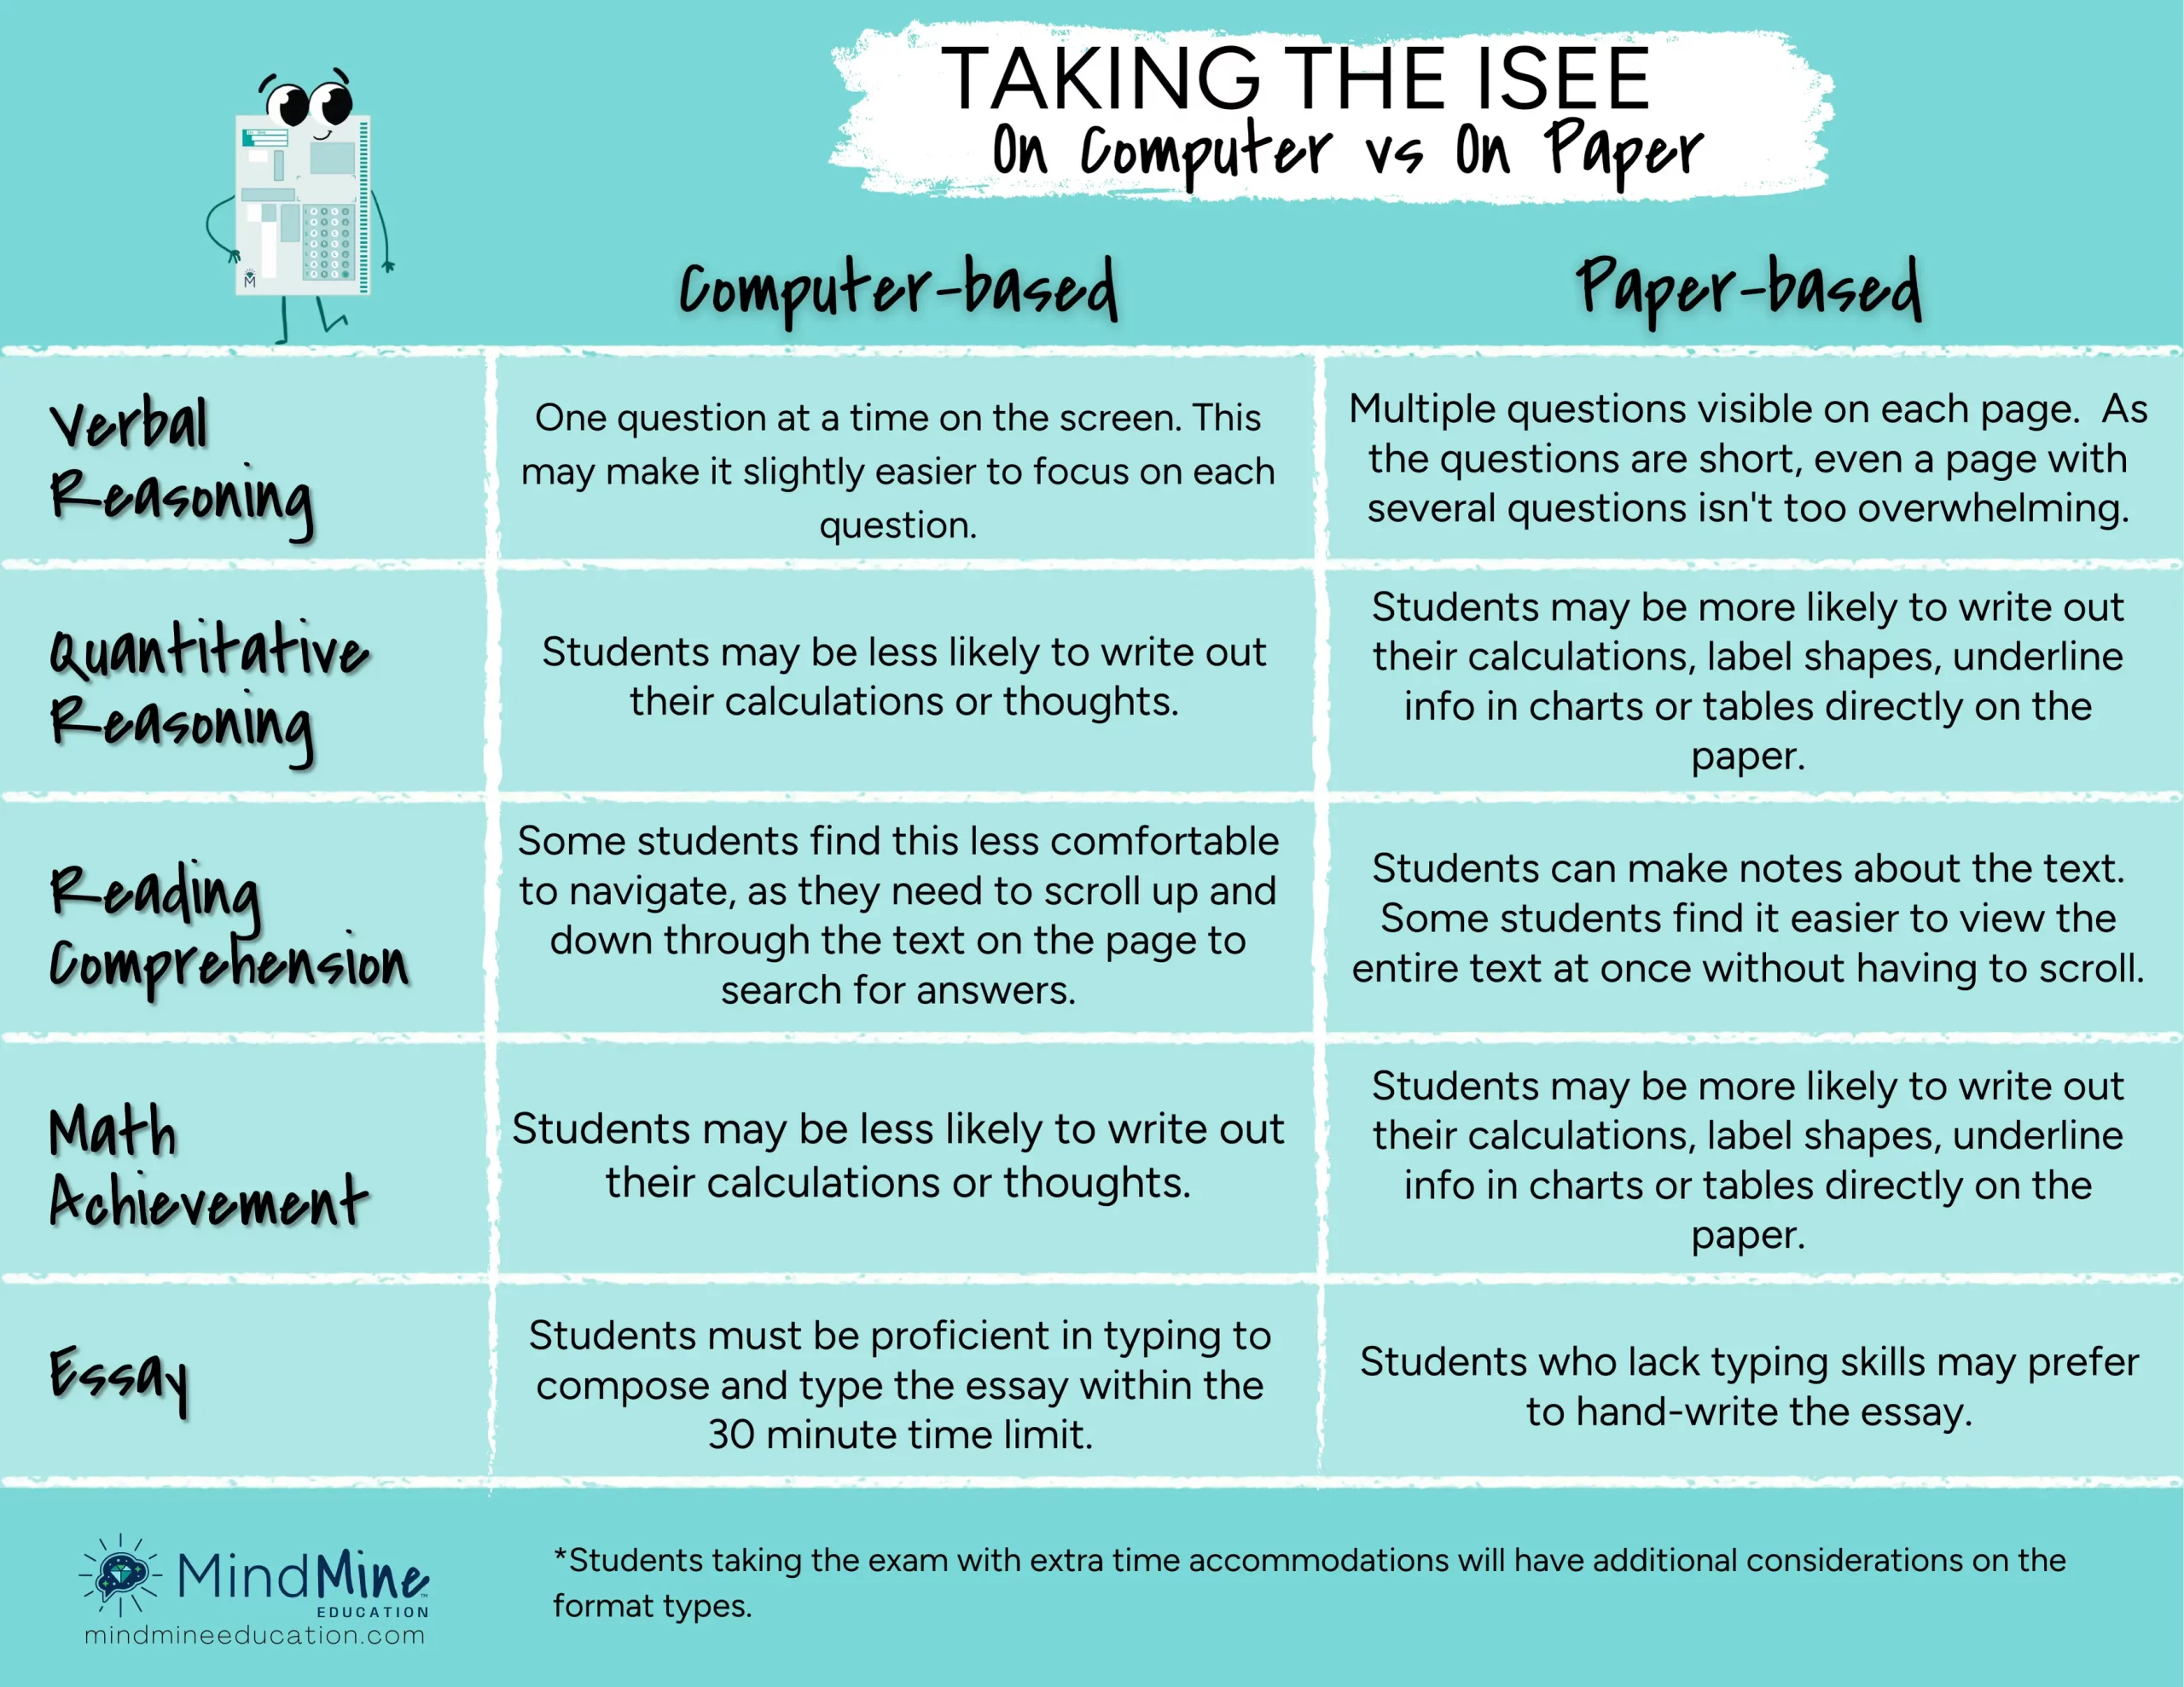 A chart comparing the differences between taking the ISEE on paper and on a computer.